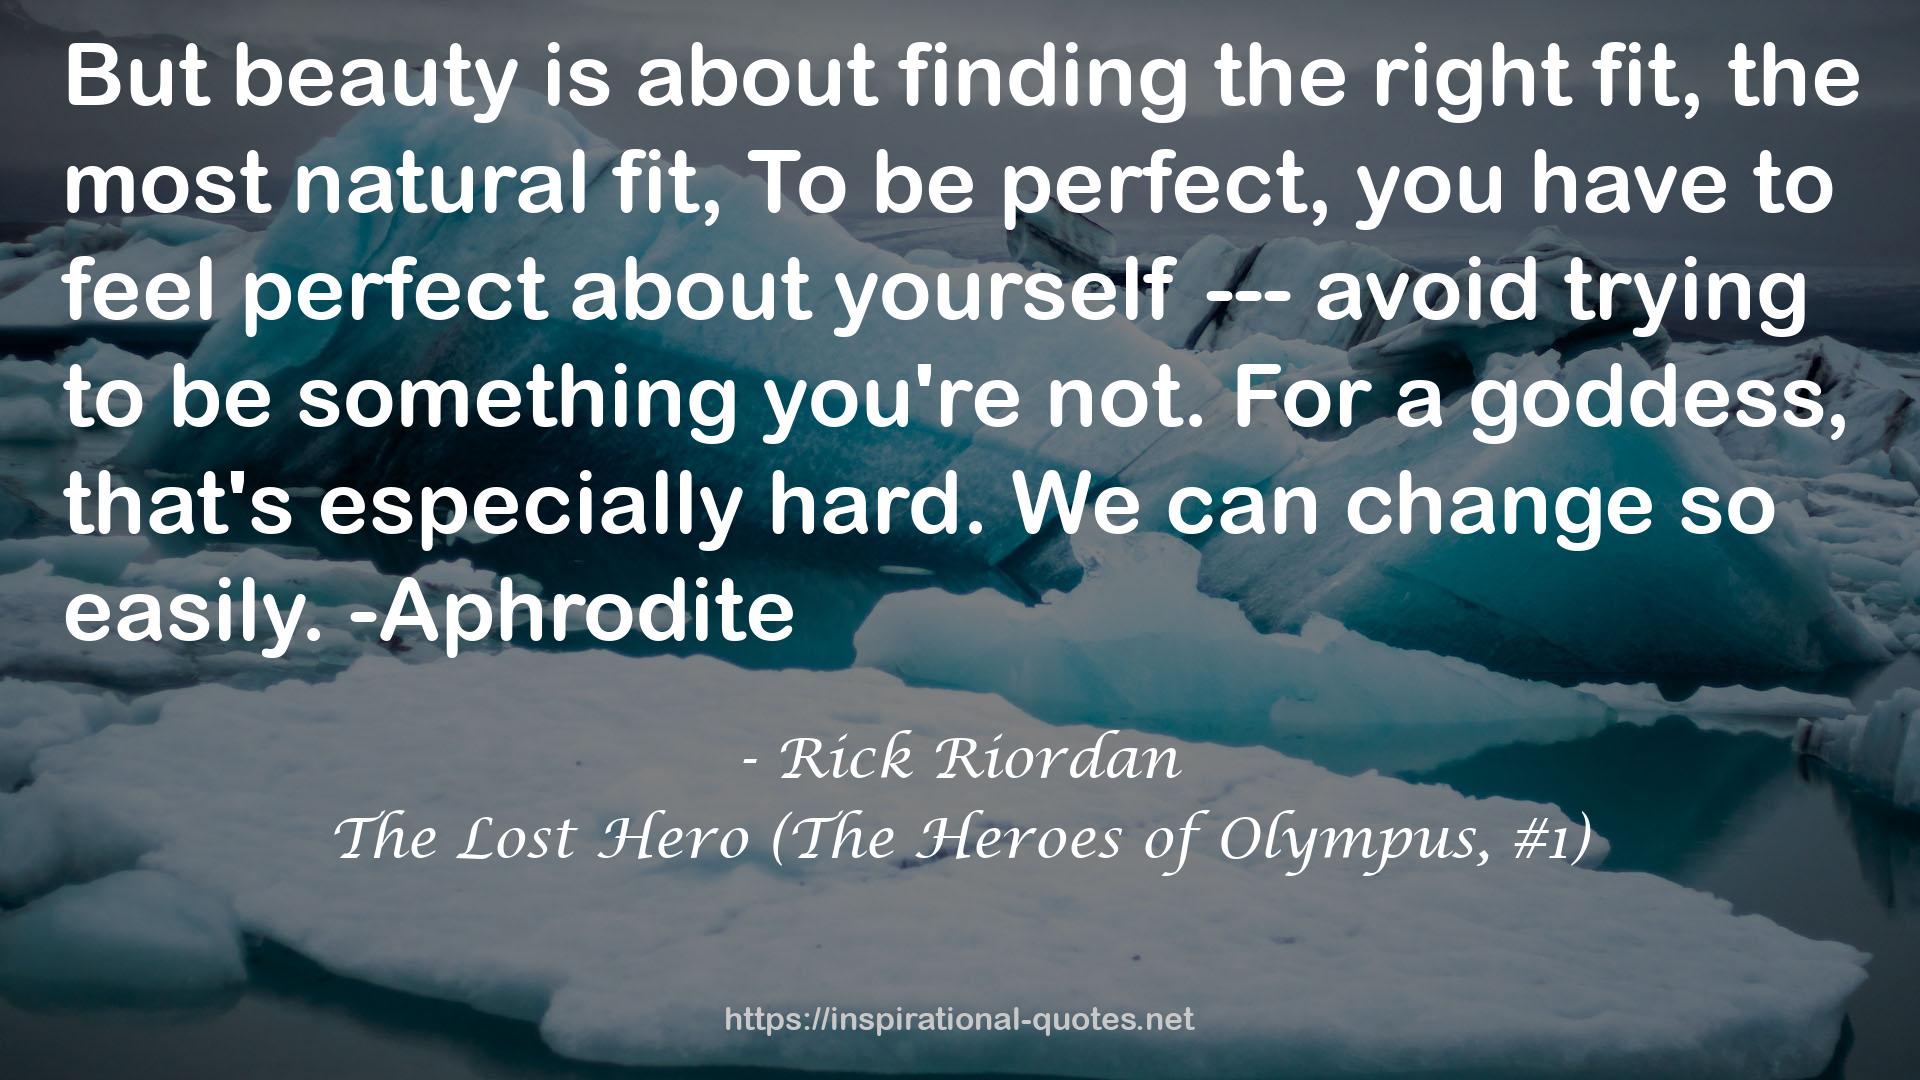 The Lost Hero (The Heroes of Olympus, #1) QUOTES